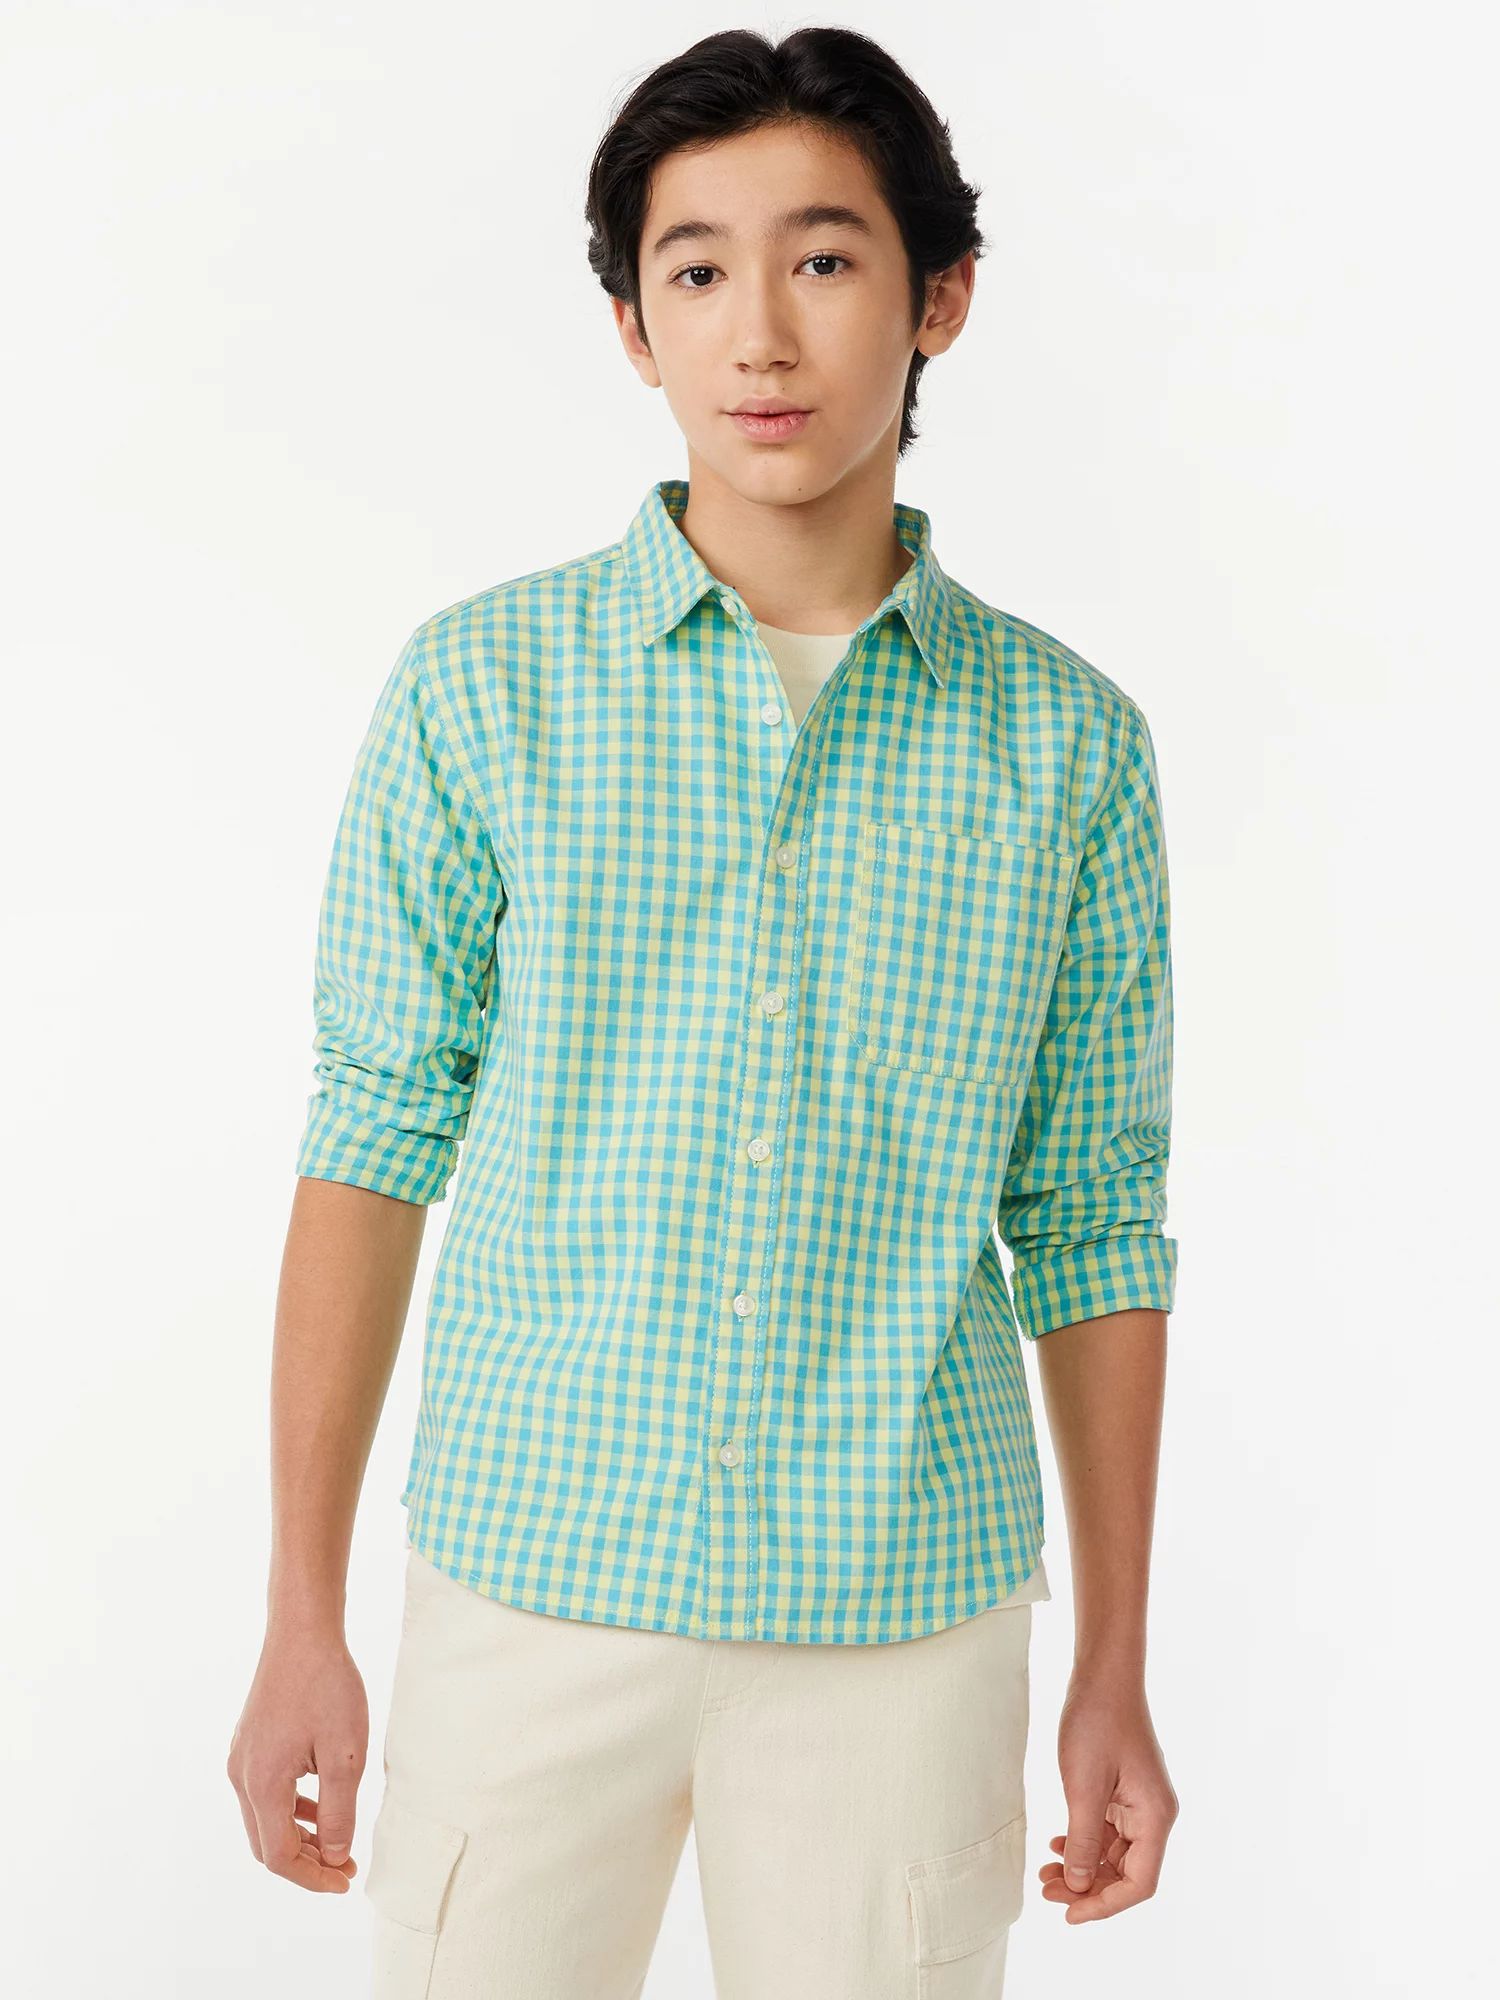 Free Assembly Boys Long Sleeve Gingham Button Down Shirt, Sizes 4-18 | Walmart (US)